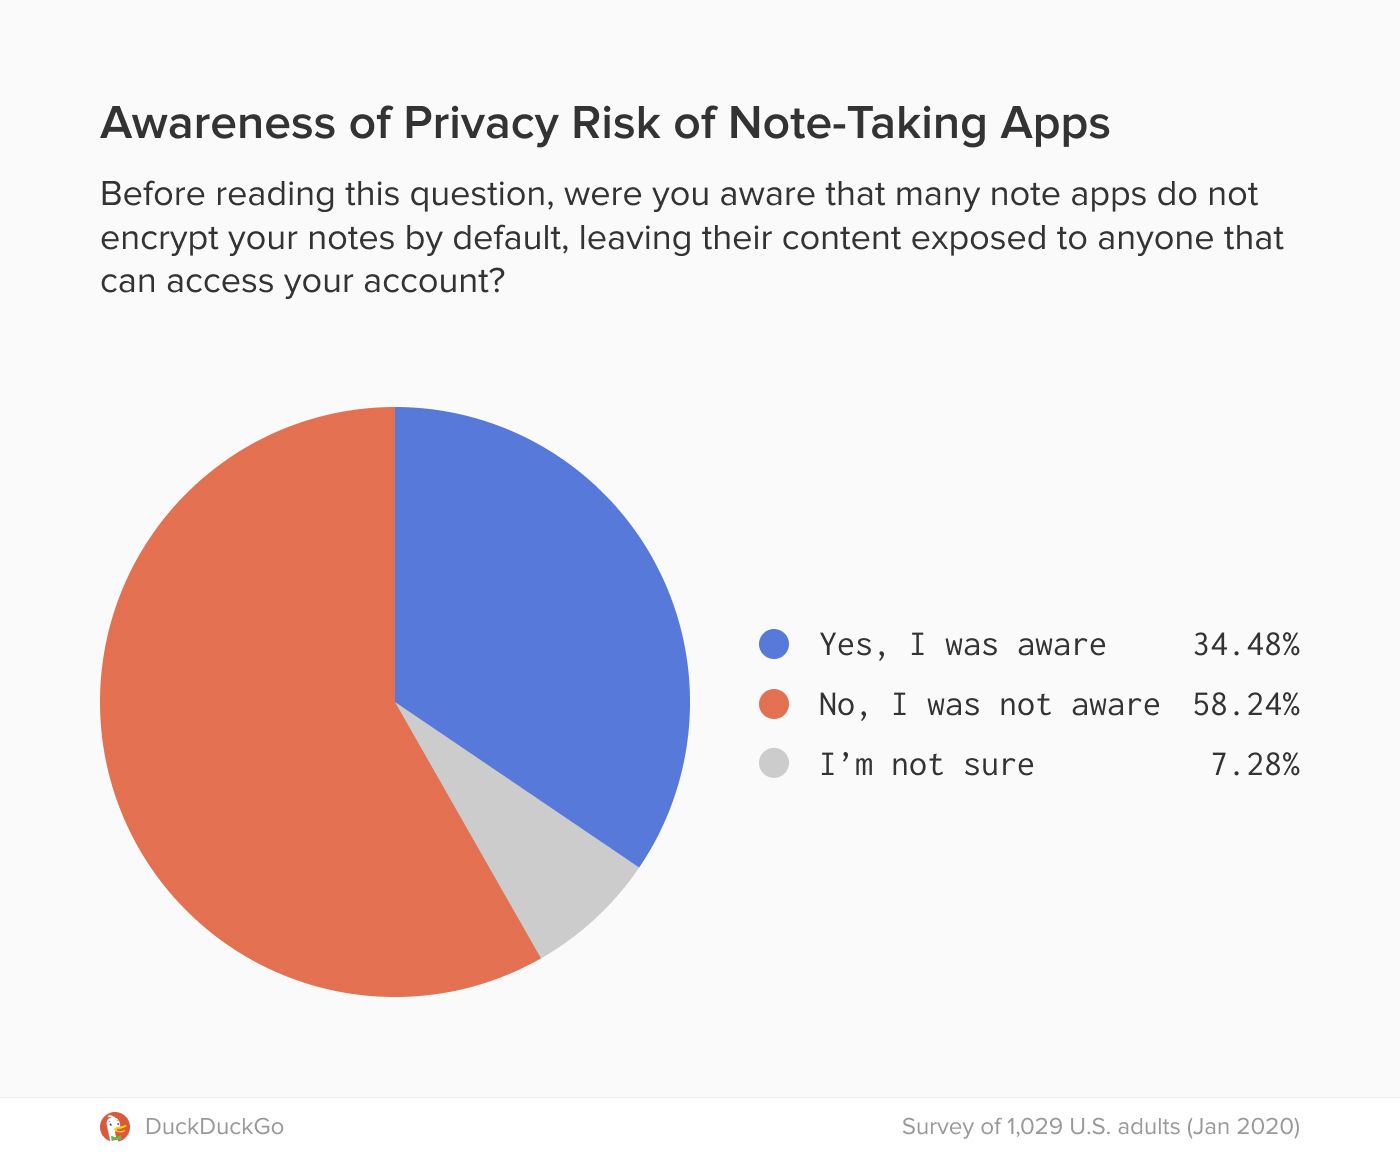 Pie chart depicting awareness of the privacy risk of note-taking apps